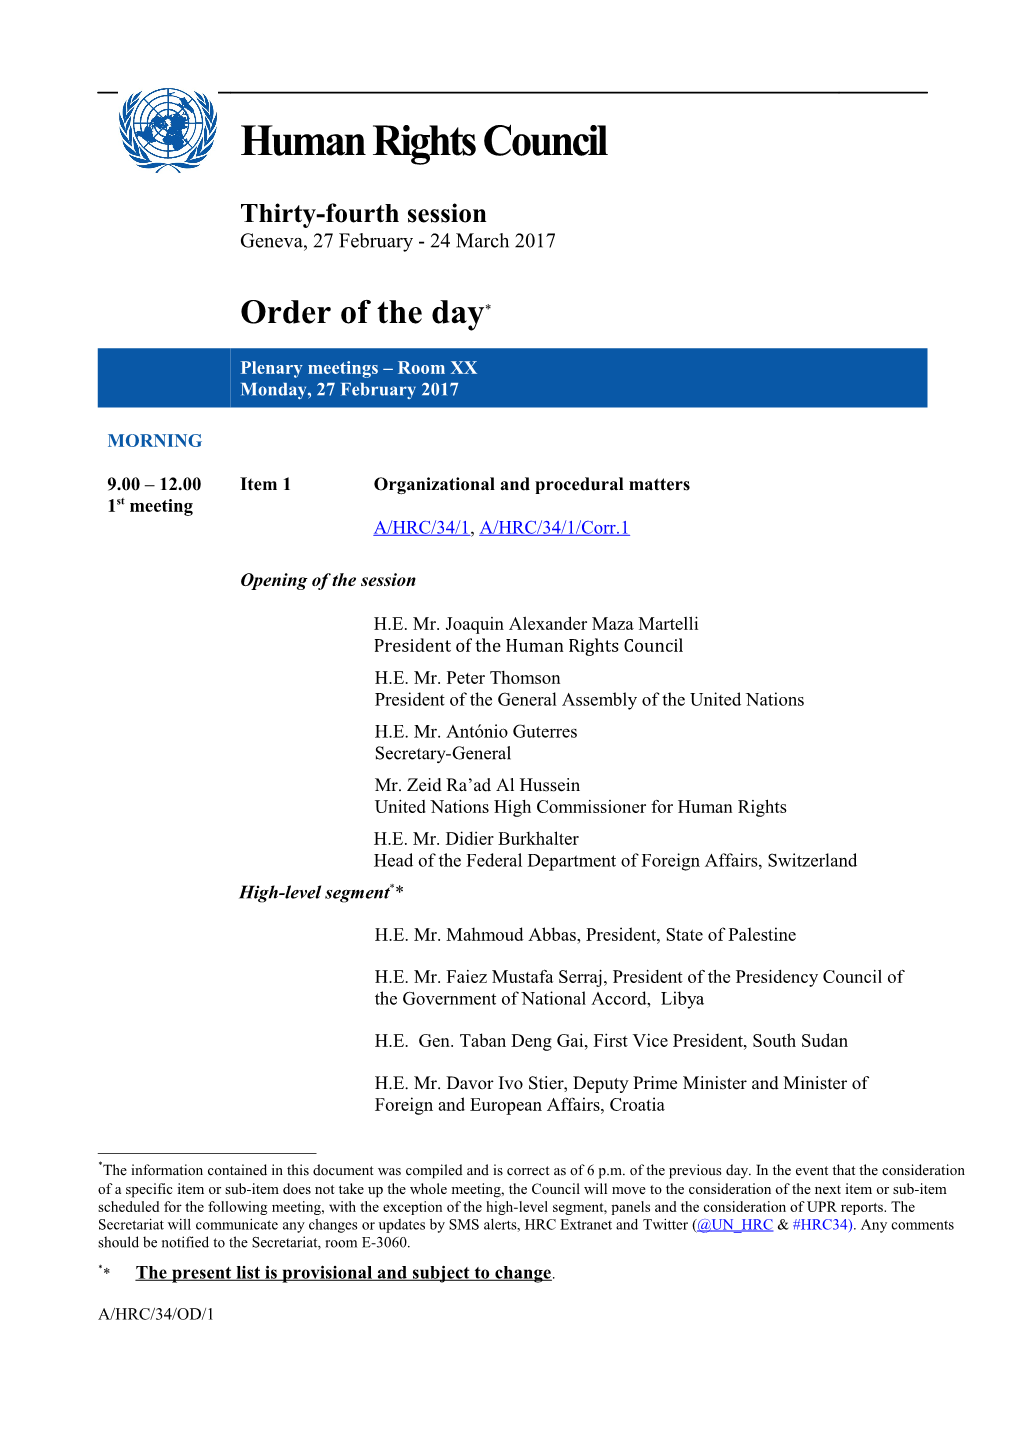 Order of the Day, Monday, 27 February 2017